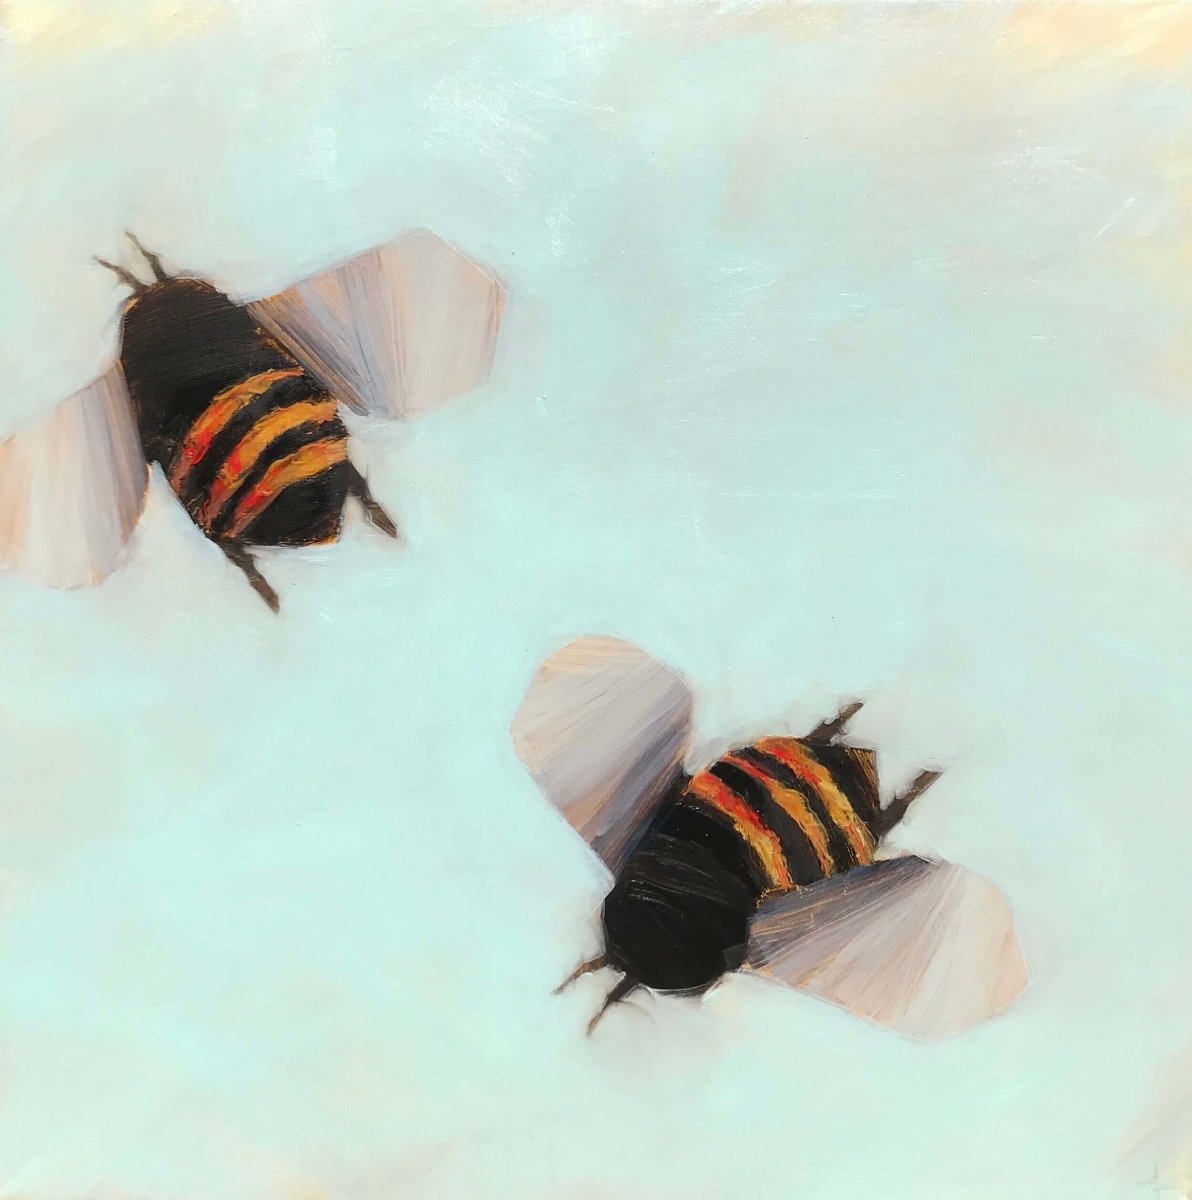 Bees 2-28 by Angie Renfro at LePrince Galleries